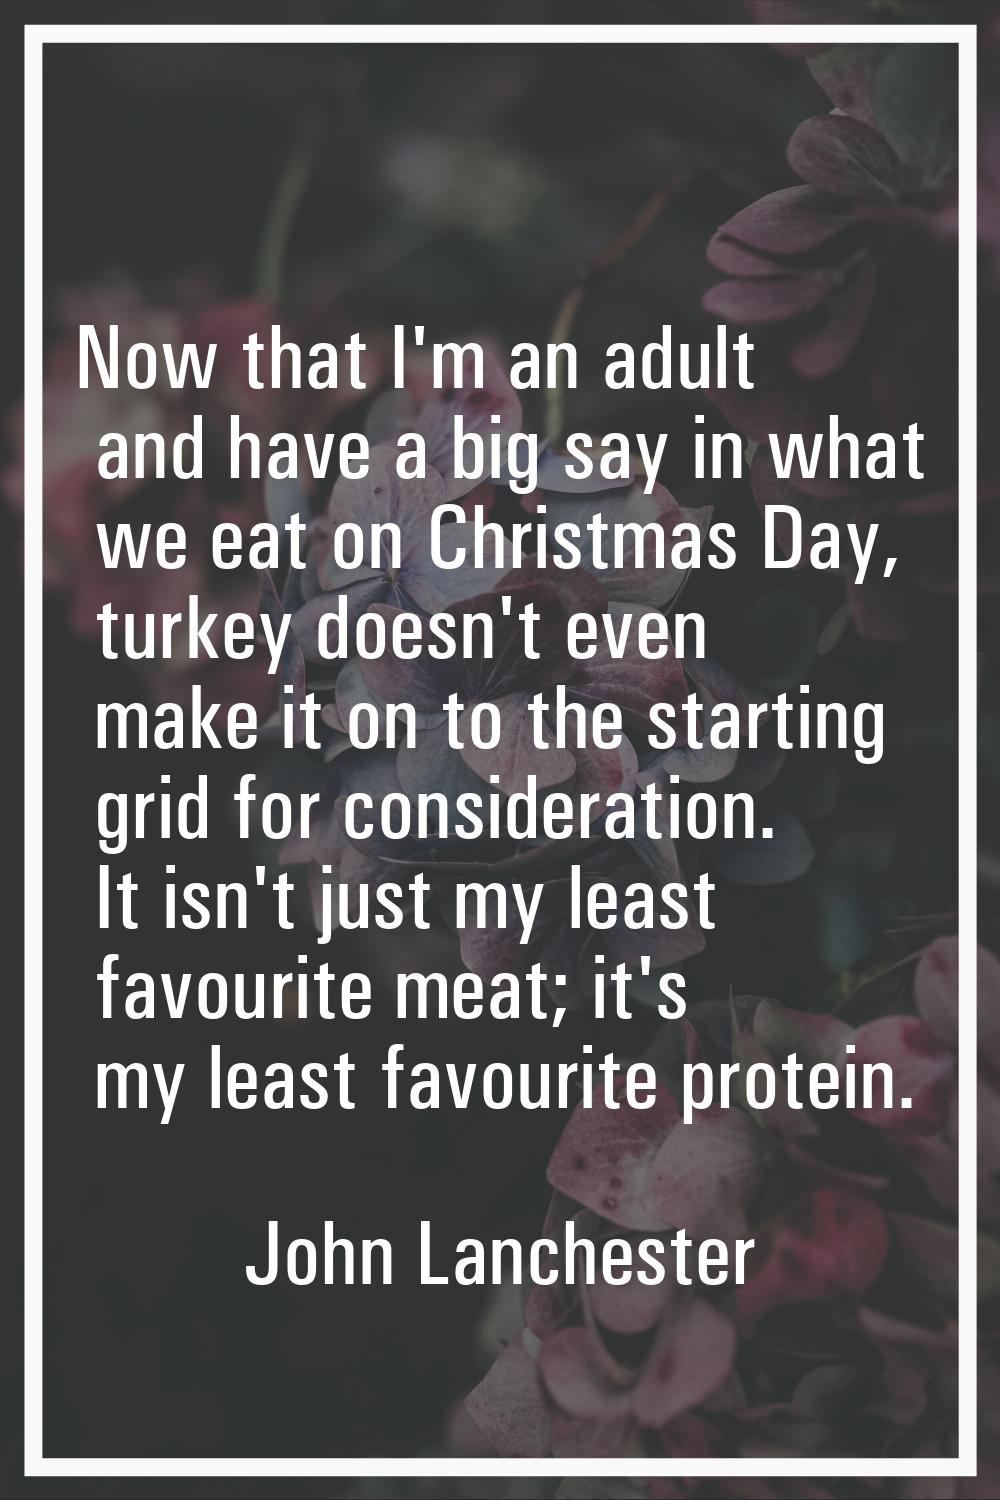 Now that I'm an adult and have a big say in what we eat on Christmas Day, turkey doesn't even make 